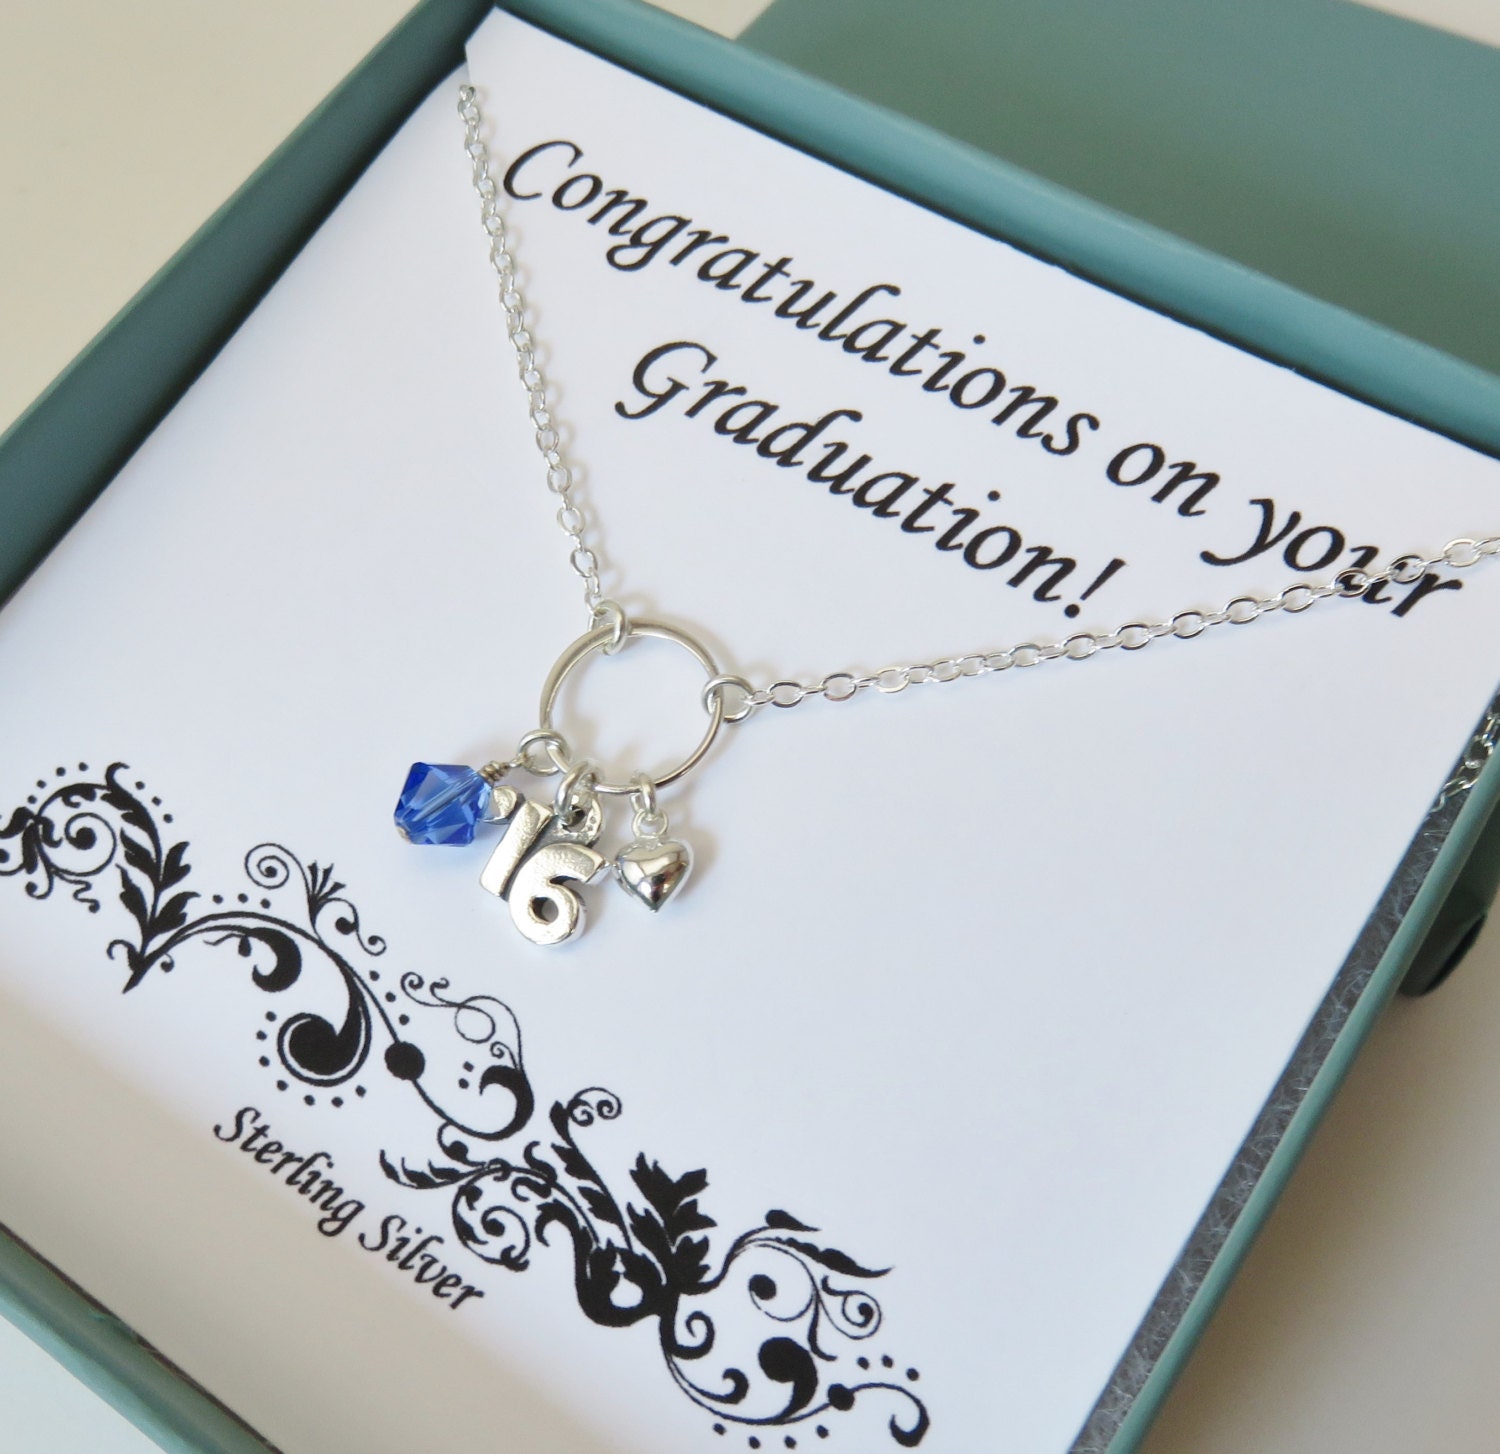 Graduation necklace 2016 graduation gift high by MarciaHDesigns